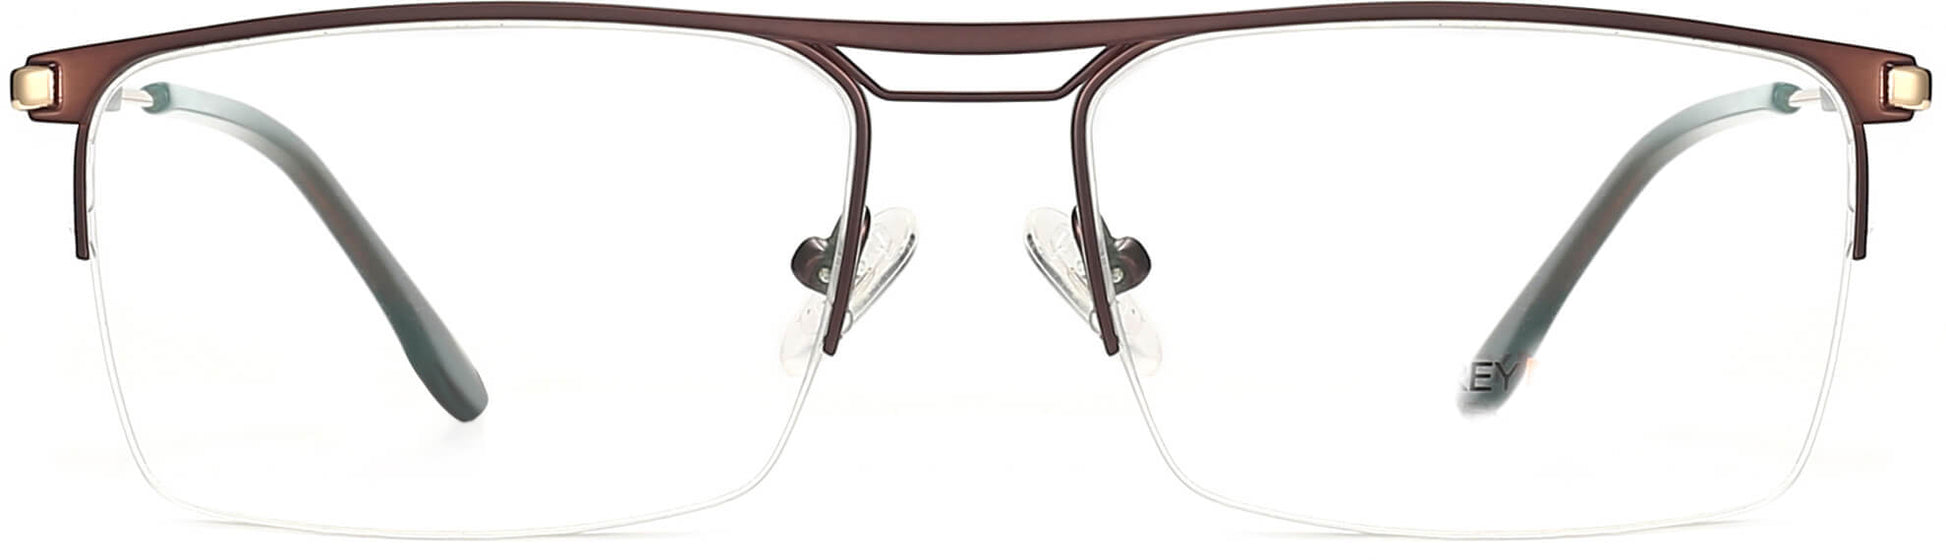 Mitchell Rectangle Brown Eyeglasses from ANRRI, front view